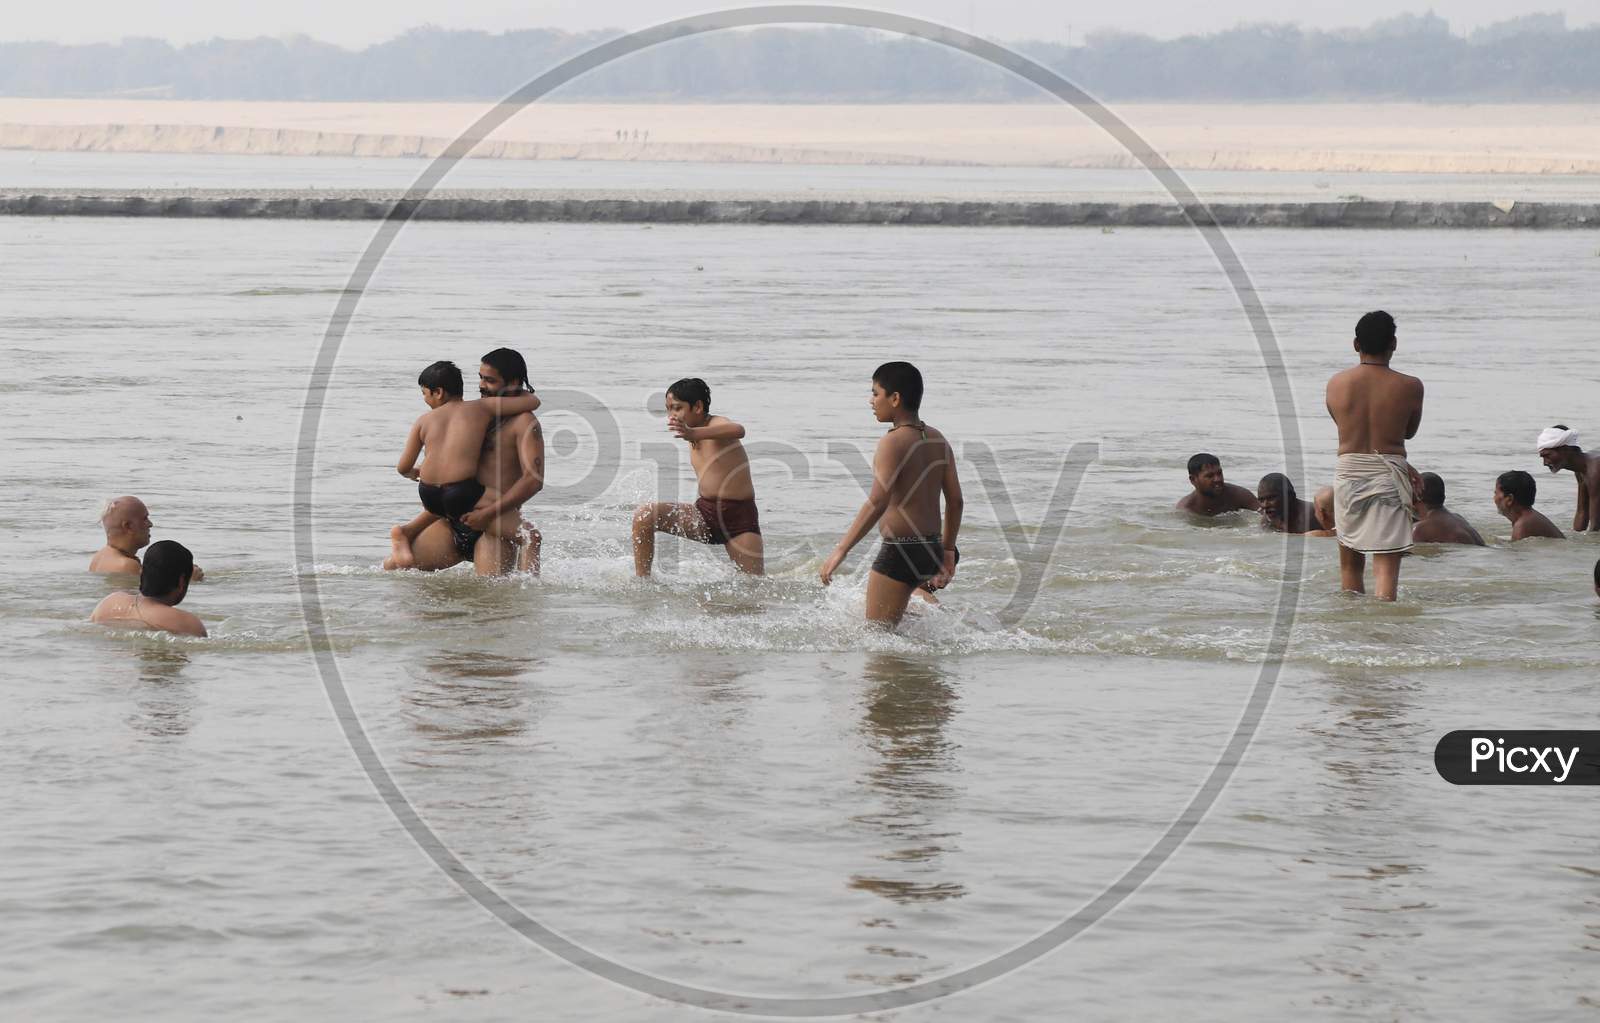 Hindu Devotees Taking Holy Bath In Triveni Sangam River on a Hot Summer Day  During Extended Nationwide Lockdown Amidst Coronavirus Or COVID-19 Pandemic in Prayagraj, May 24,2020